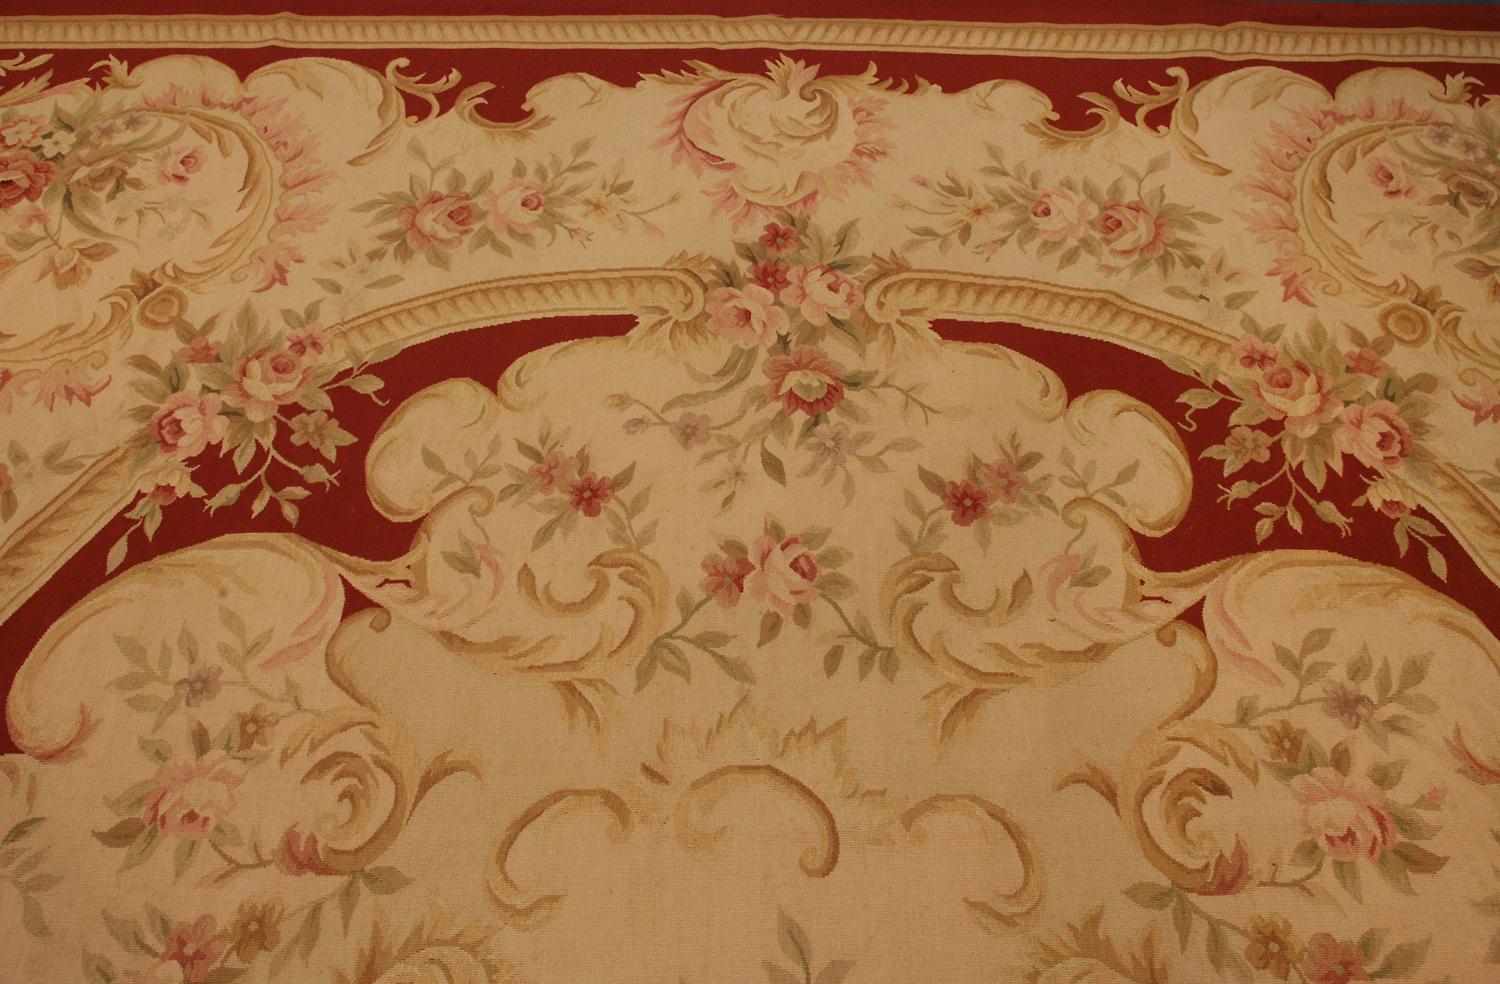 Contemporary Aubusson Rug Lockcloth Victorian Style Chinese,  21st Century